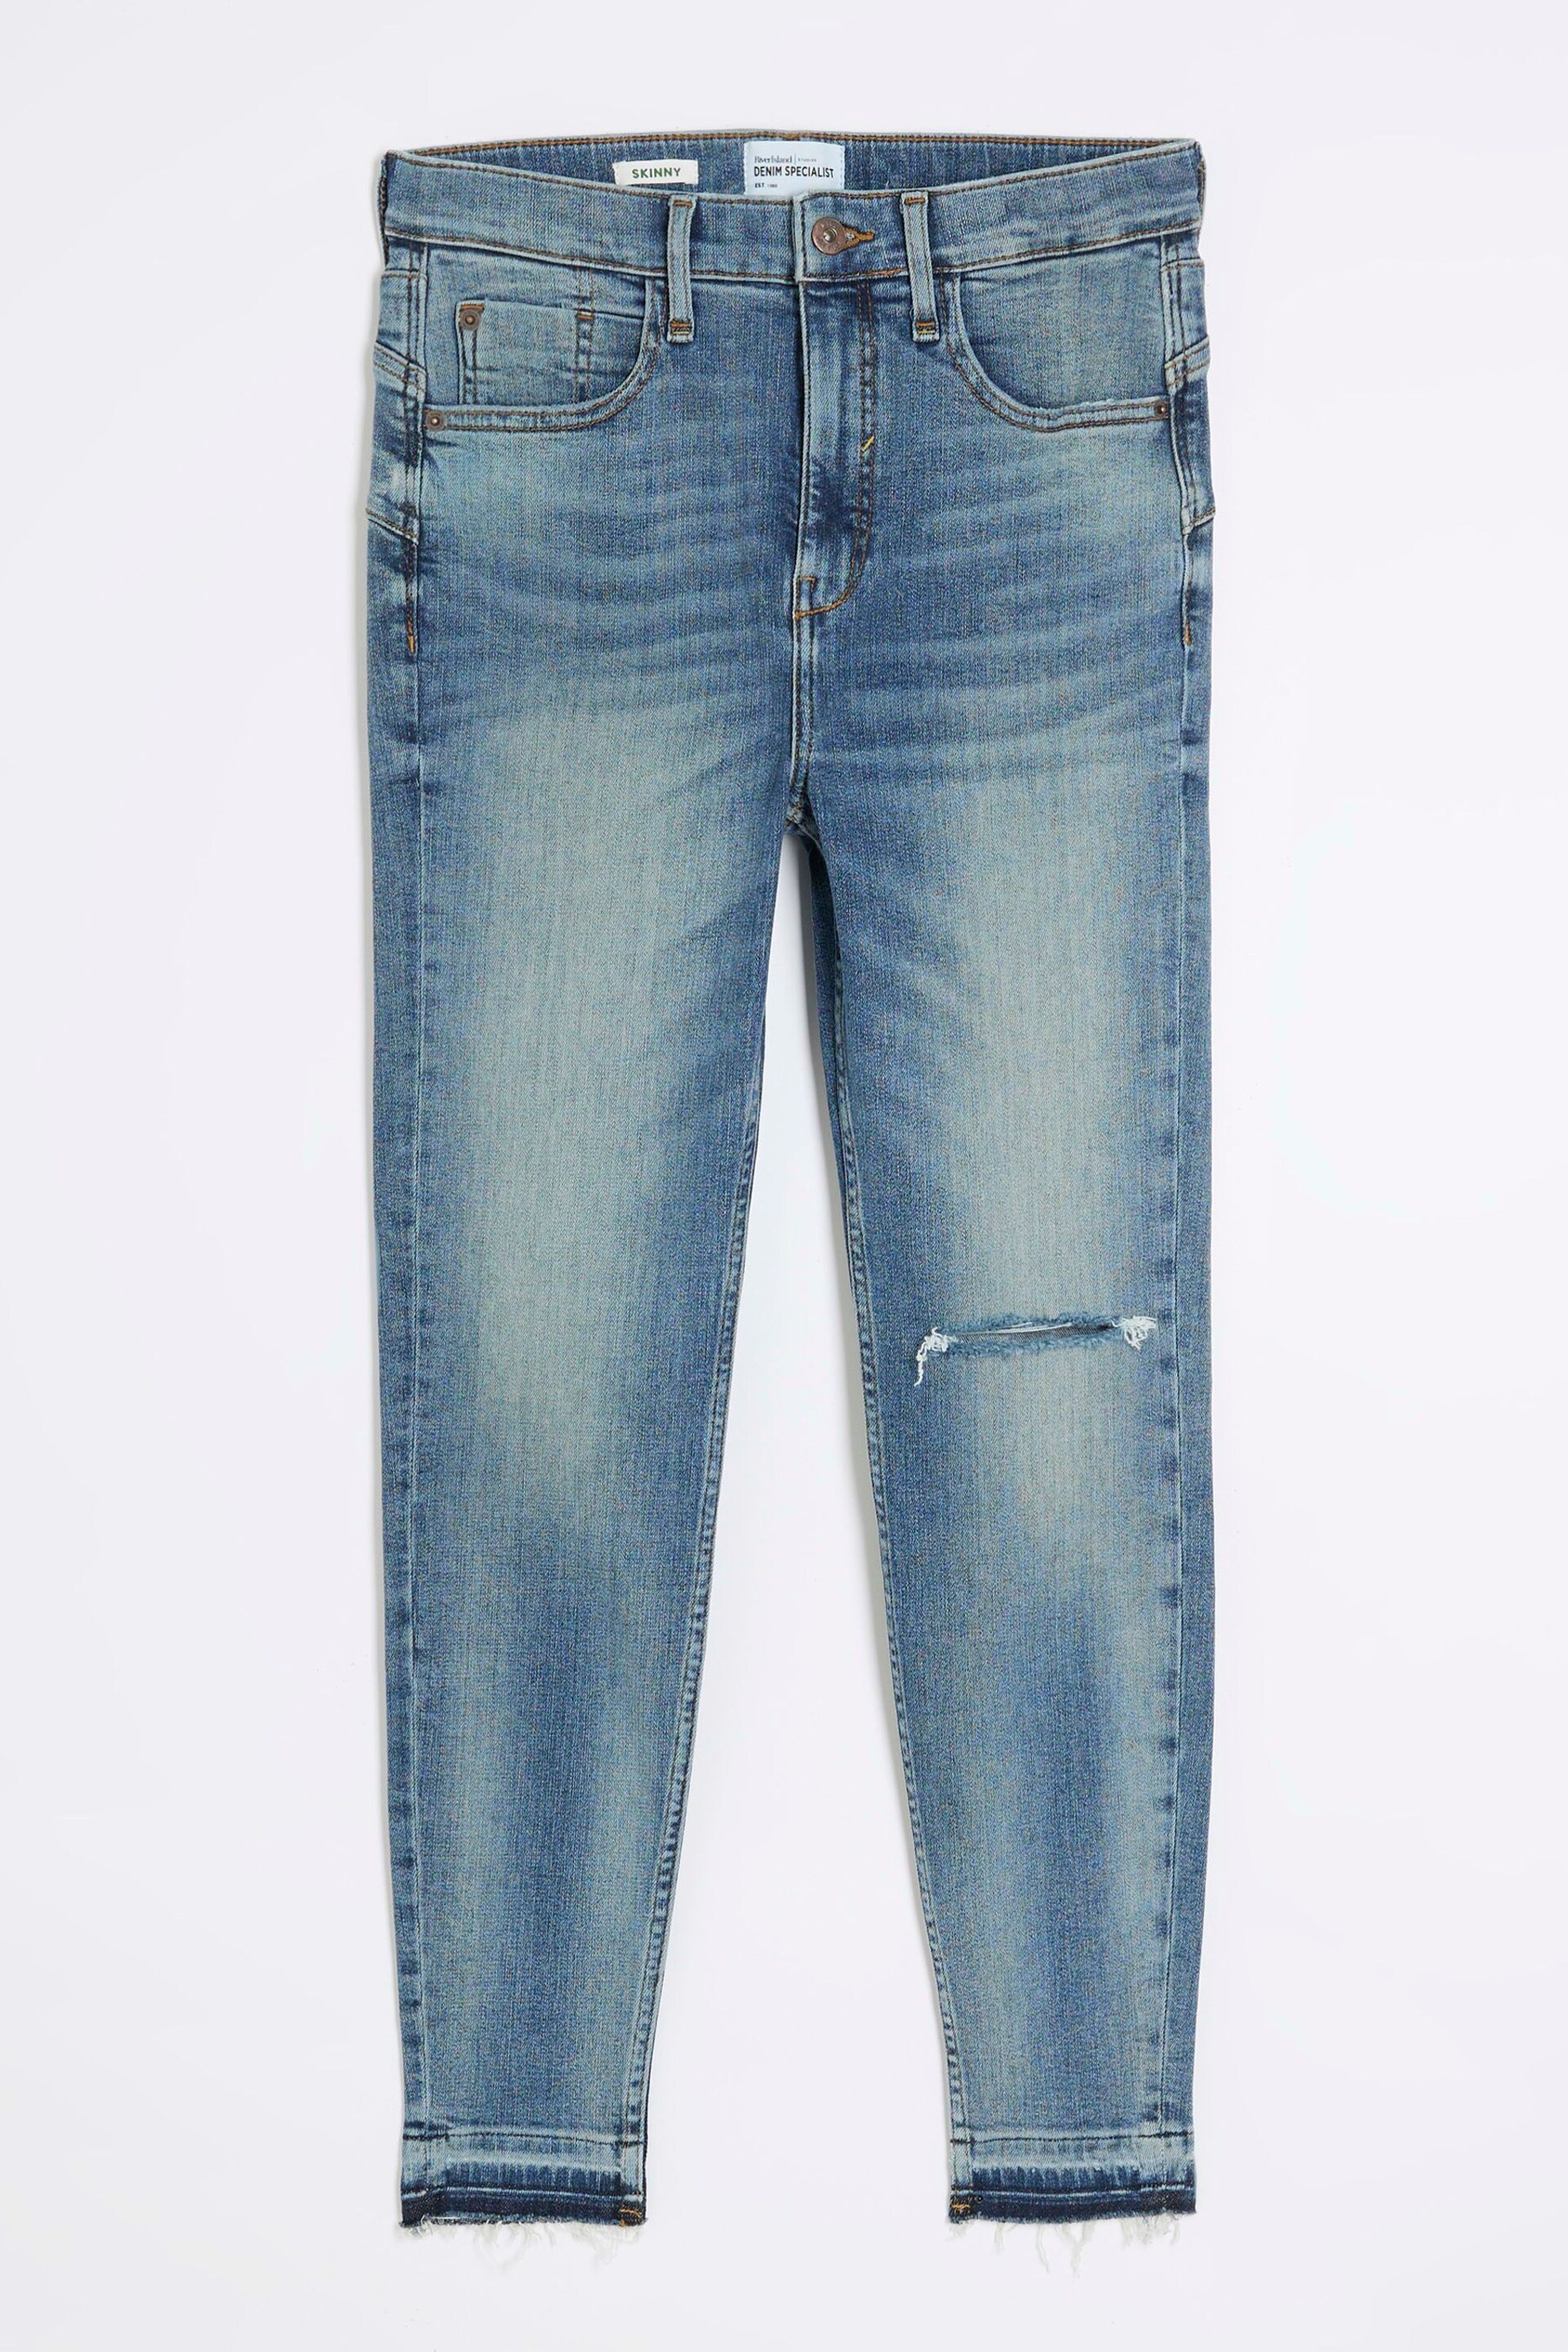 River Island Blue High Rise Tummy Hold Supper Skinny Ripped  Jeans - Image 5 of 7